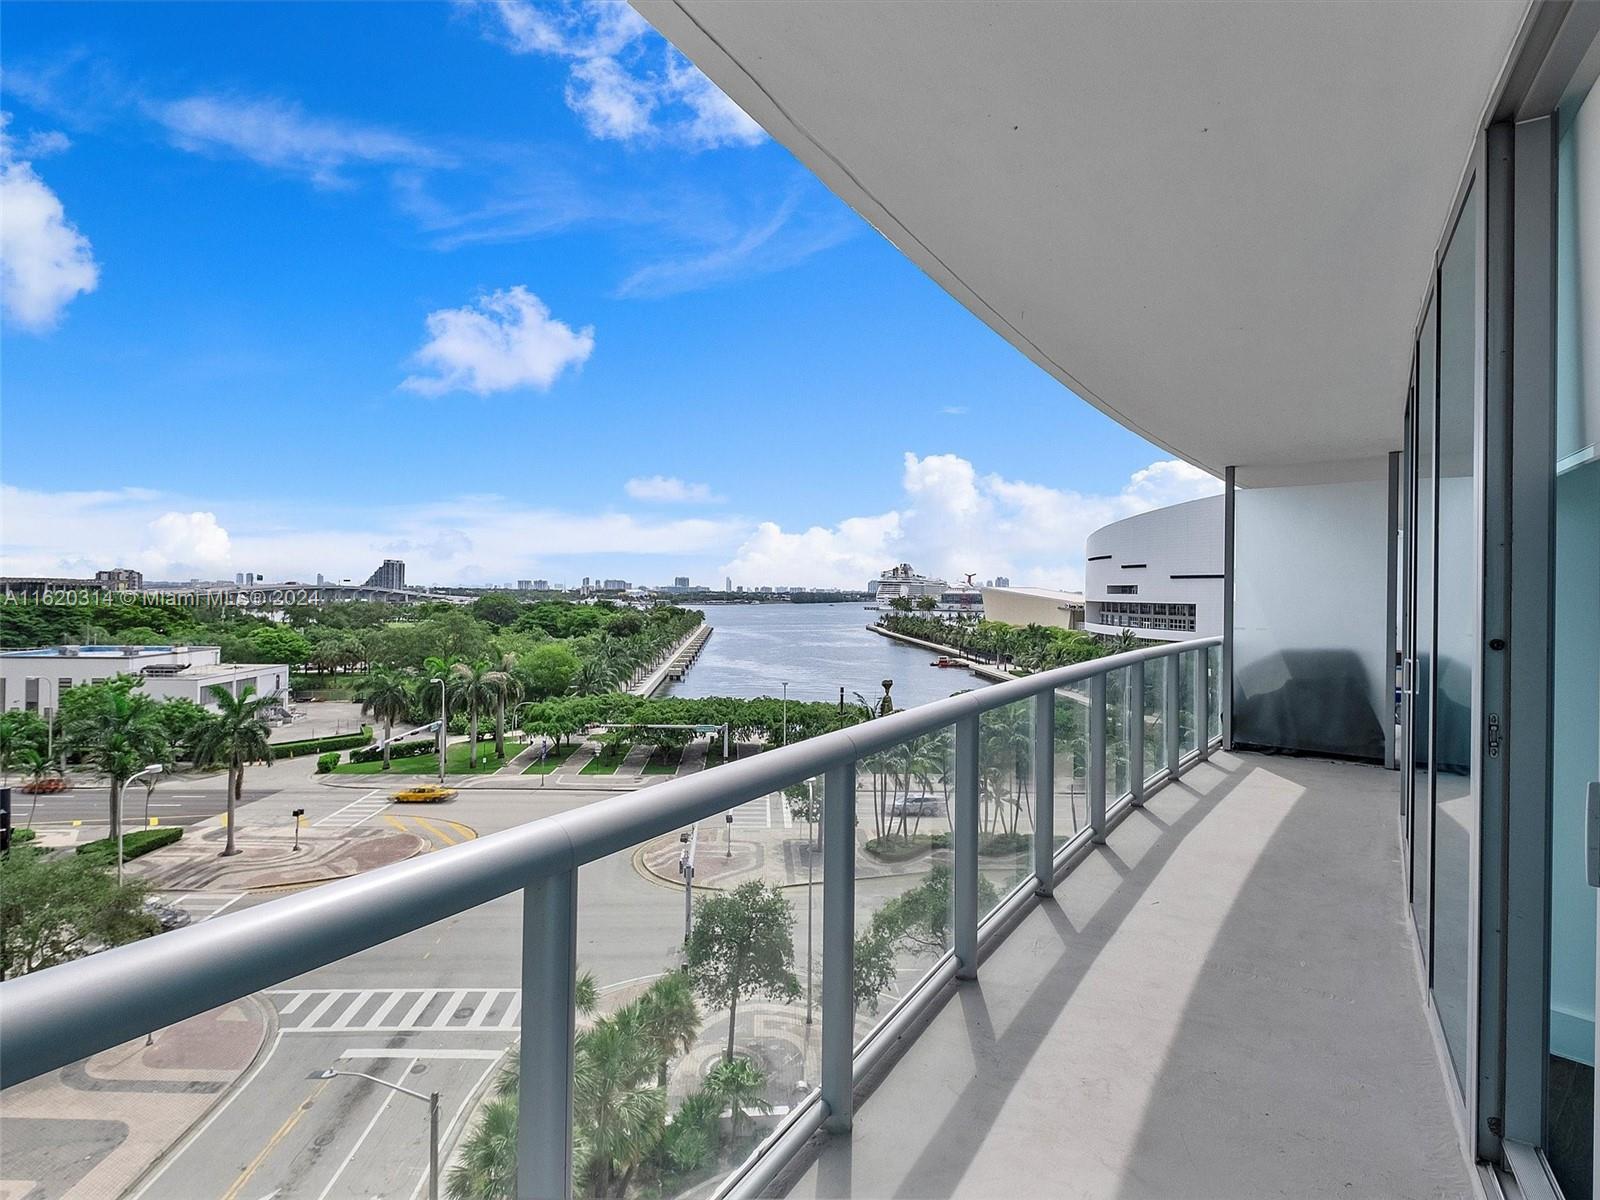 You simply can’t beat the combination of views and prime location of Marina Blue, in the heart of downtown and steps away from Kaseya Center, Maurice A. Ferre Park, and the burgeoning Miami Worldcenter. Beautifully remodeled unit with floor to ceiling windows throughout, highlighting the stunning panoramic views of the bay. Spacious open floorplan with abundant natural light and a large balcony; building has incredible resort style amenities including sunrise and sunset pools and jacuzzi, business and fitness centers, sand volleyball court, BBQ area, and more. 24-hour security, valet parking, storage room, and assigned covered parking space.